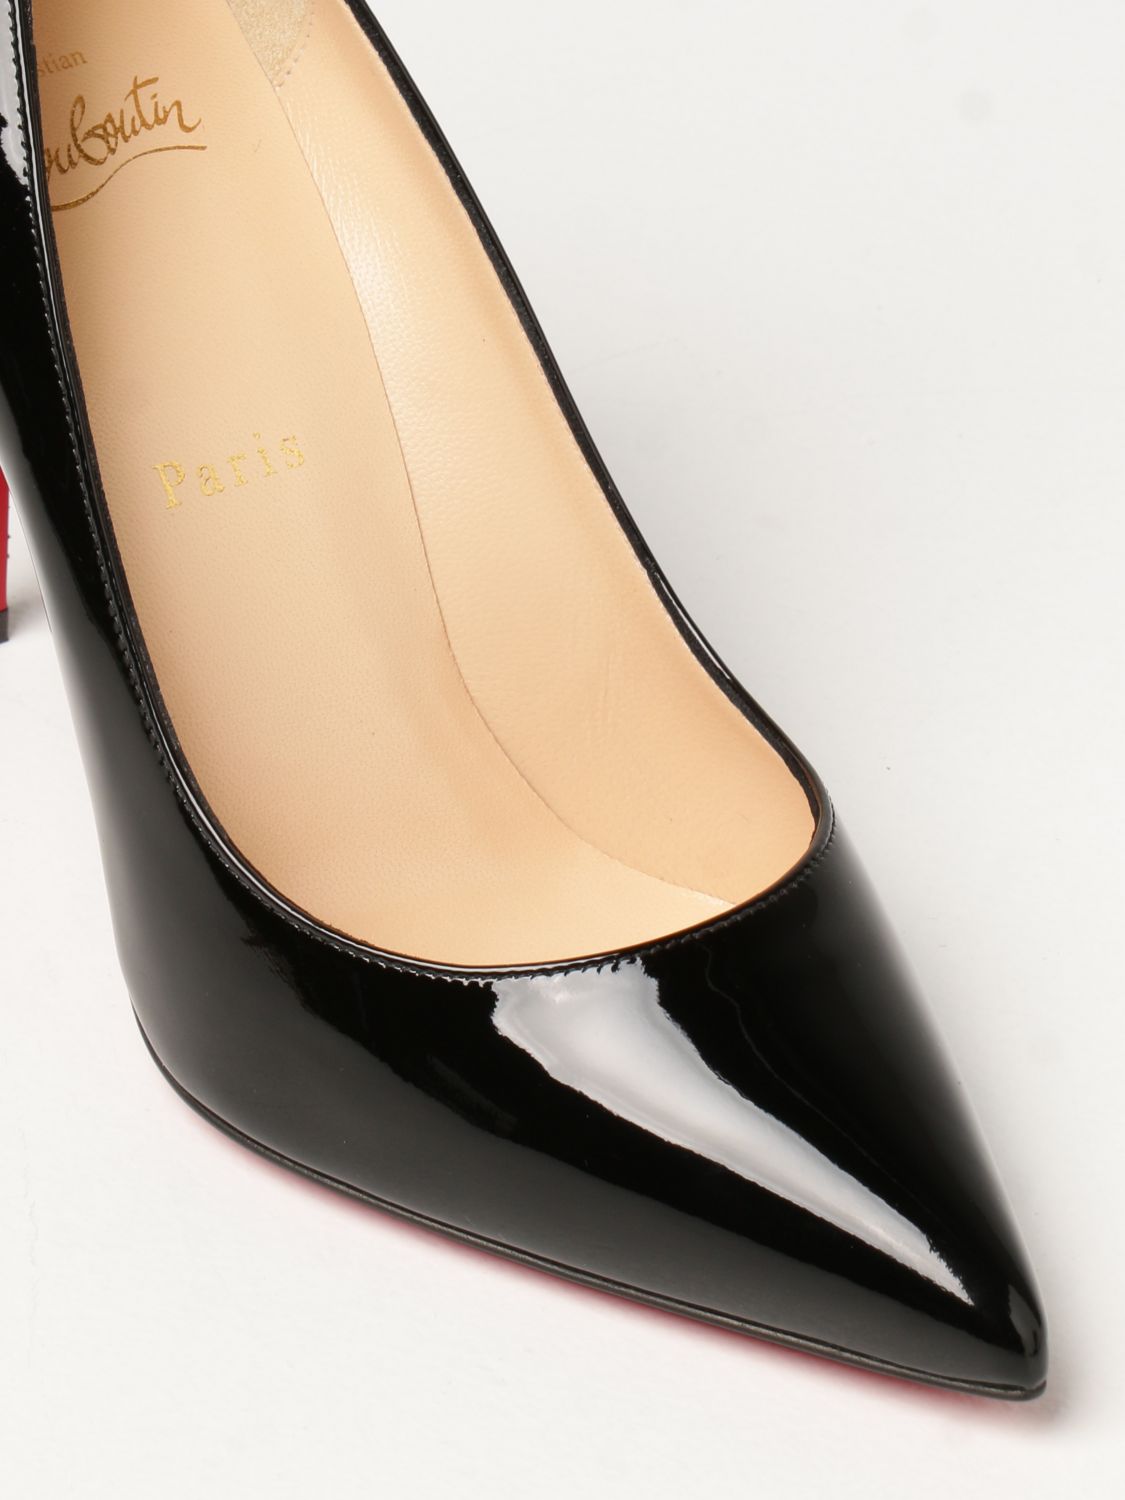 CHRISTIAN LOUBOUTIN: Pigalle pumps in patent leather | Pumps ...